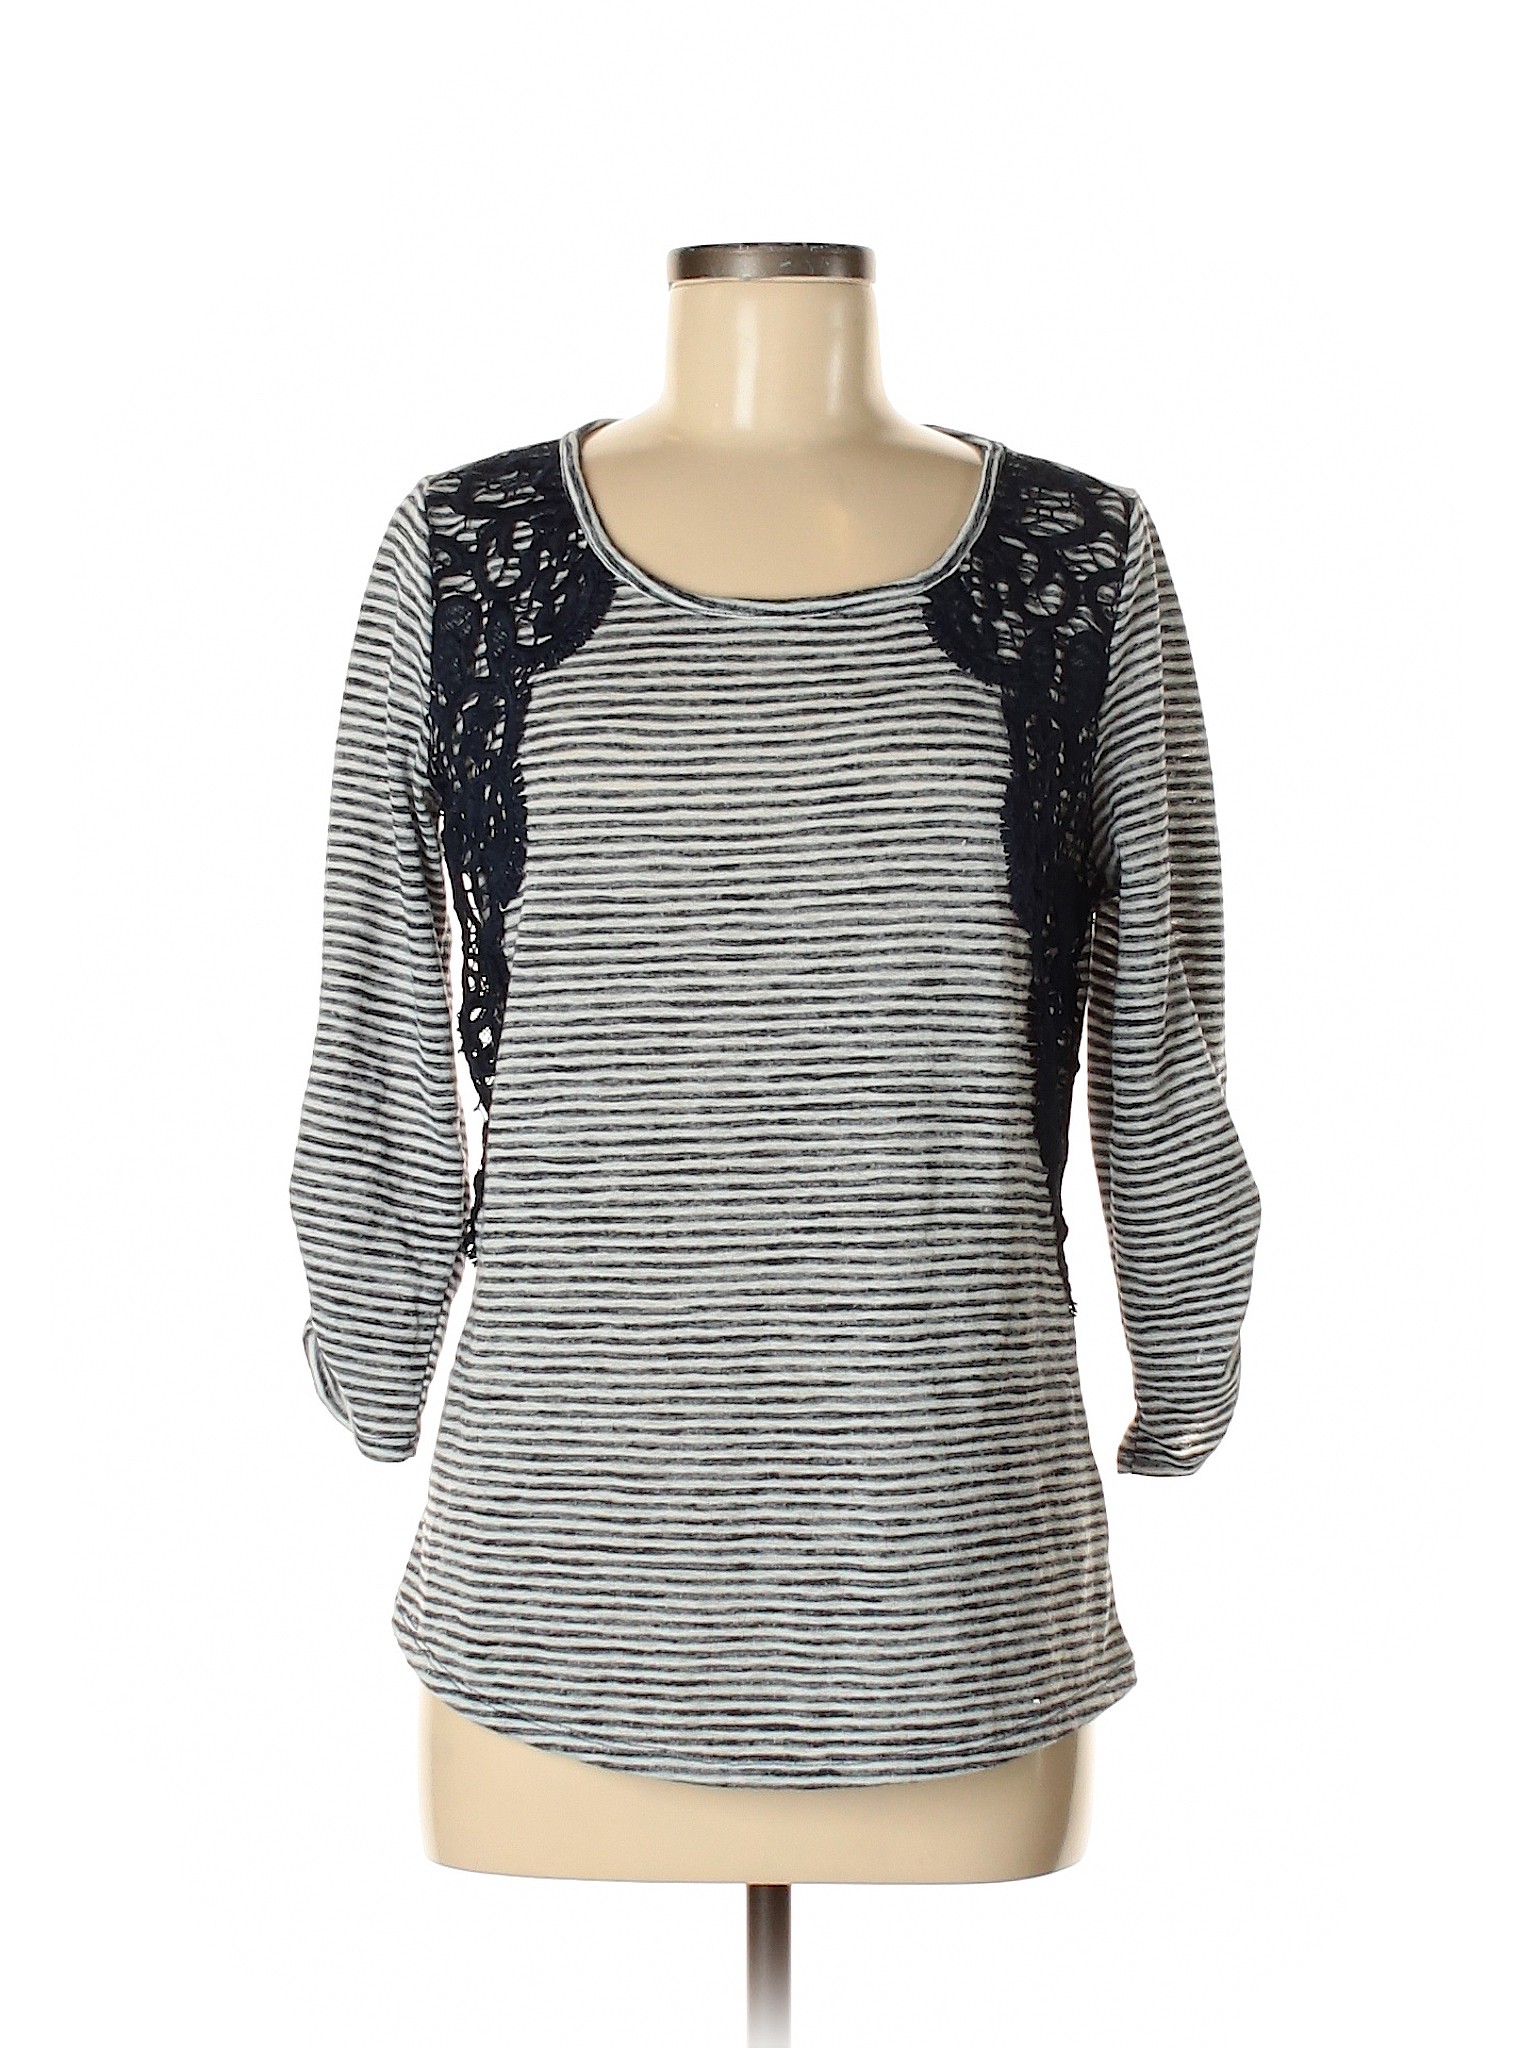 Maurices Stripes Blue 3/4 Sleeve Top Size M - 72% off | thredUP